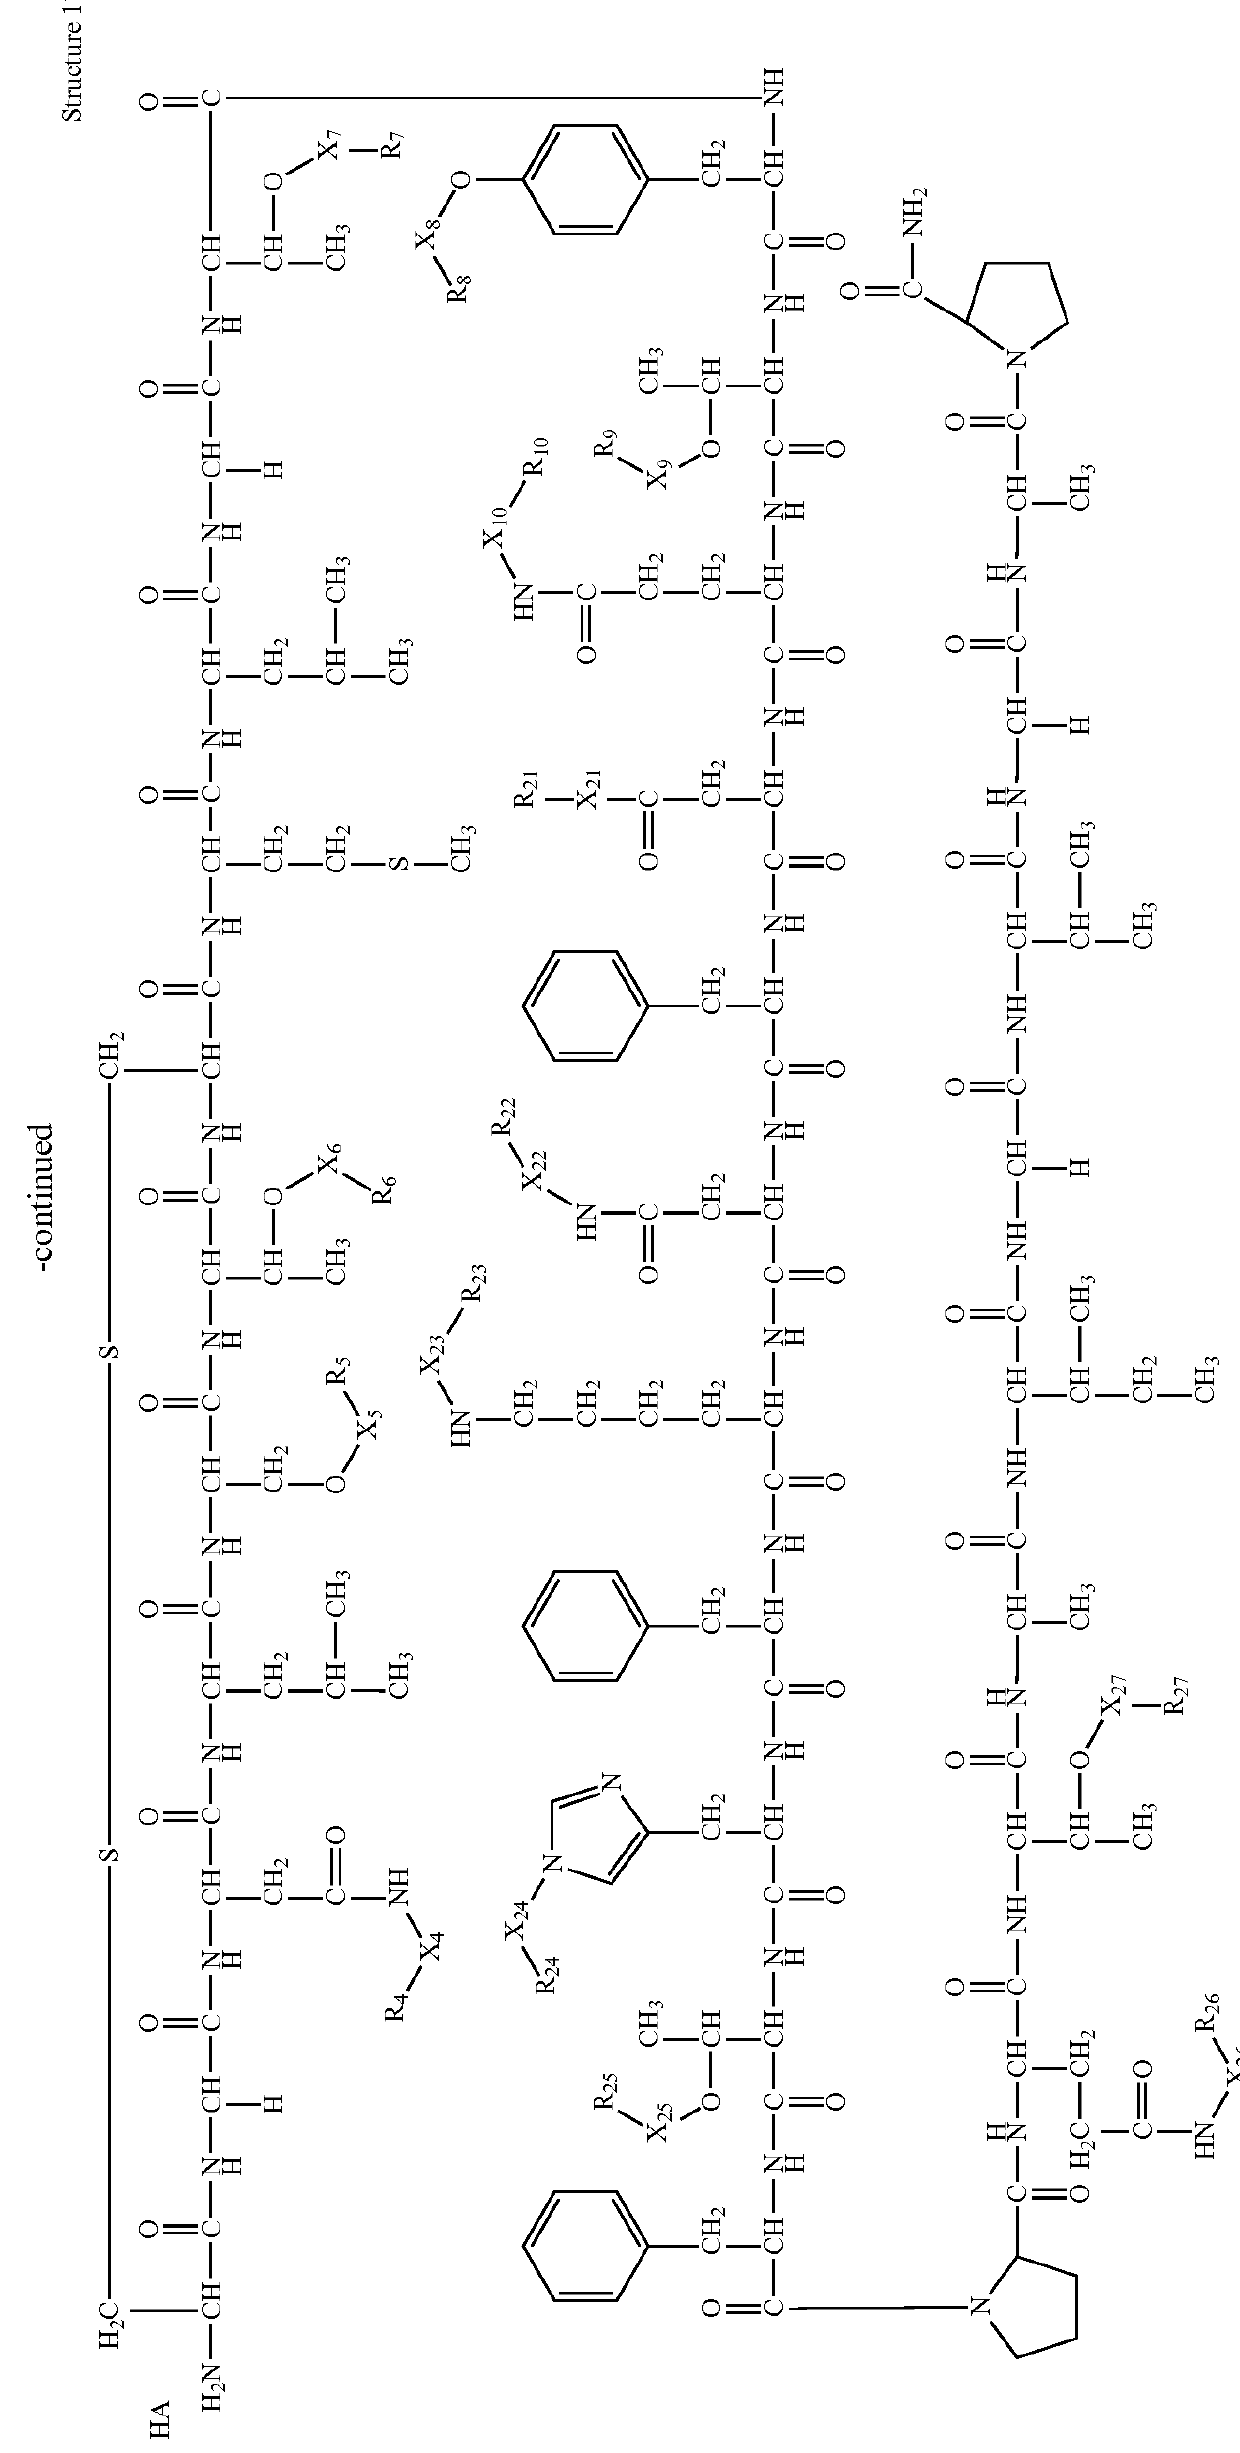 High penetration prodrug compositions of peptides and peptide-related compounds